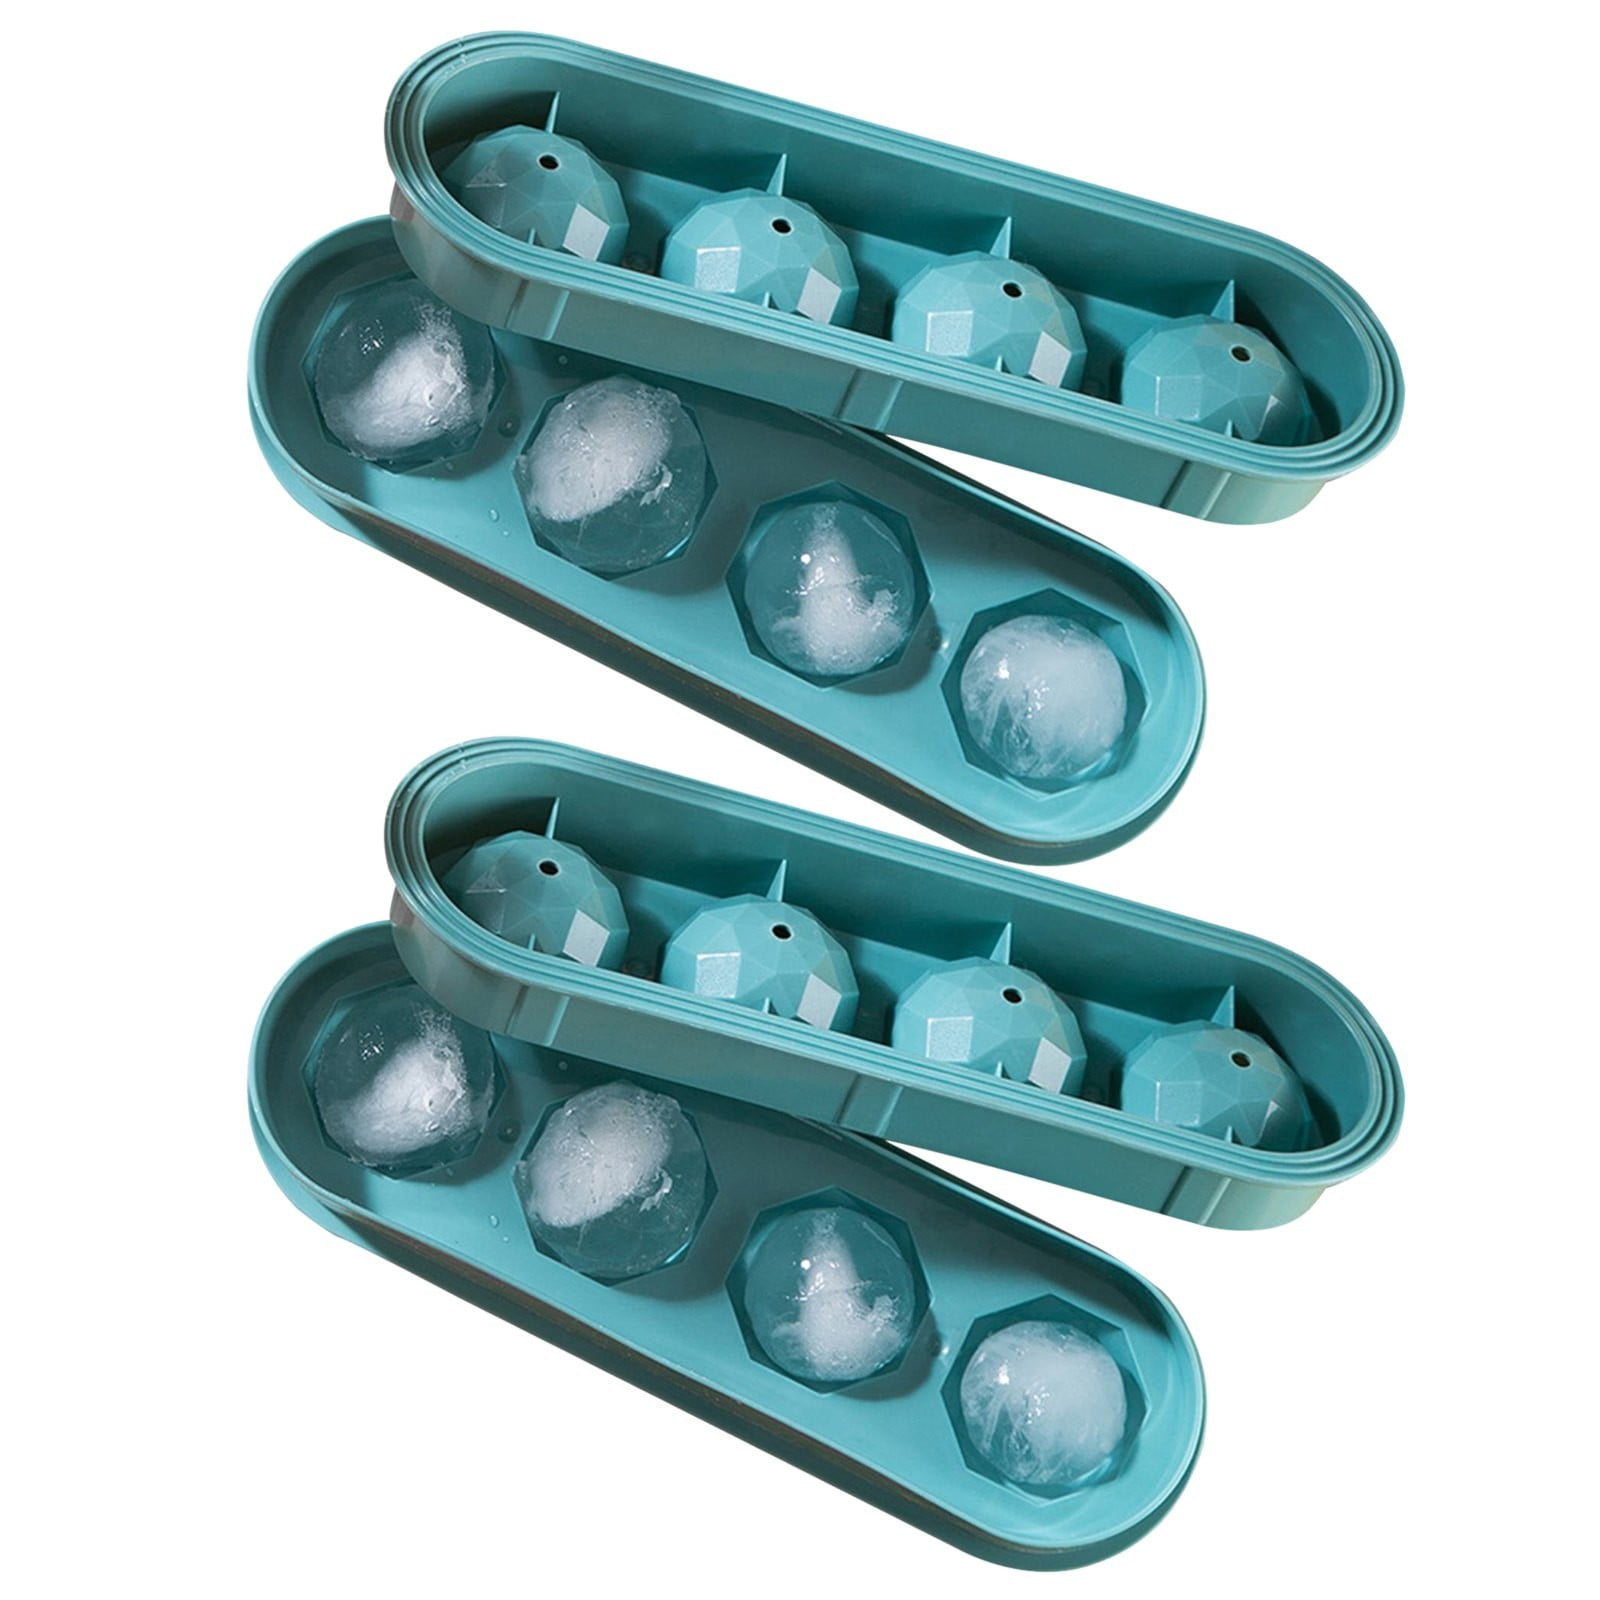 JDEFEG Metal Ice Cubes Stones Flexible Ice Tray 4 Ice Molds for